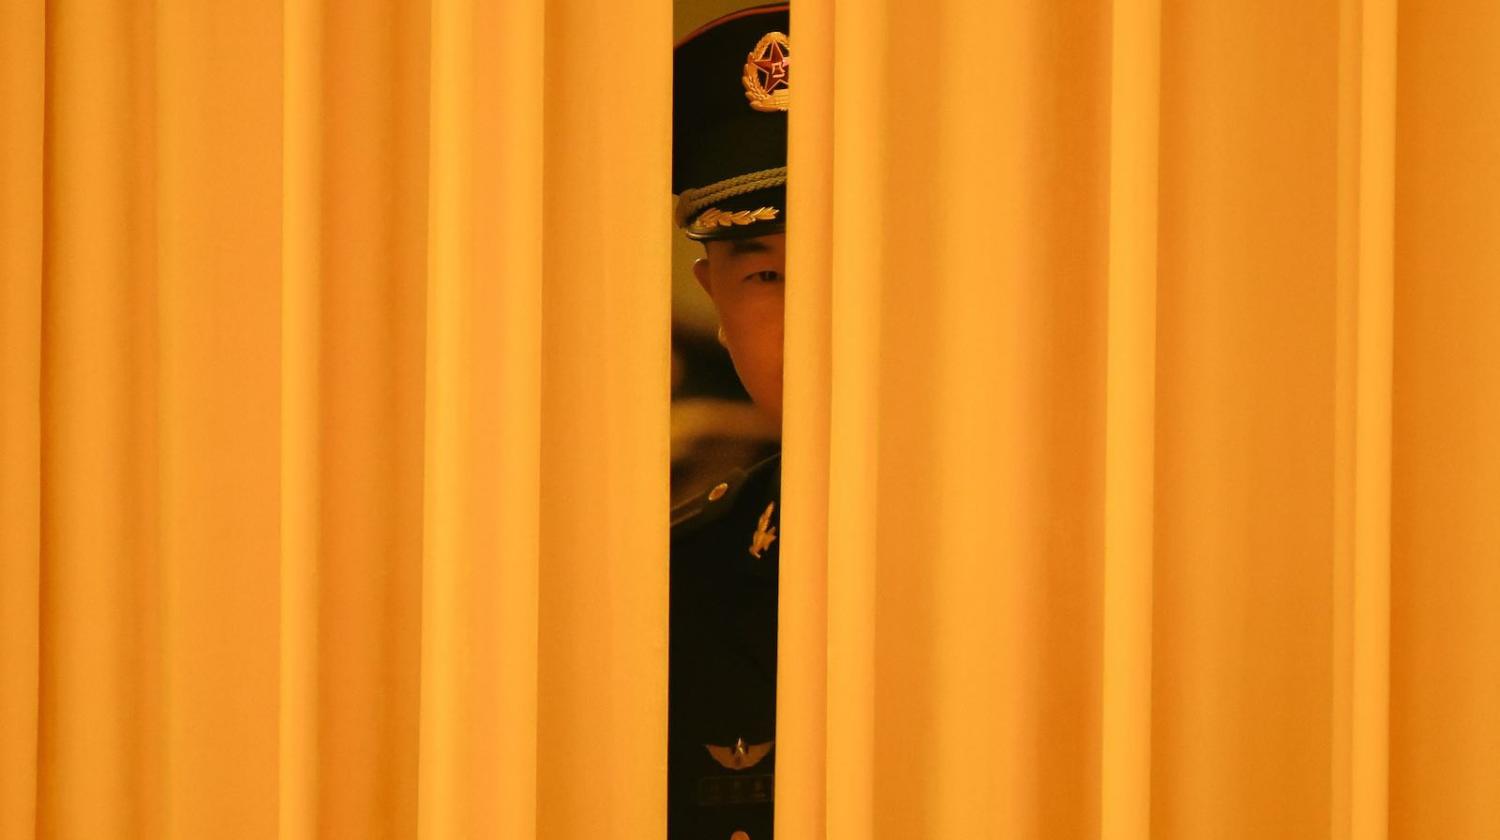 Chinese honour guards prepare for the arrival of China's President Xi Jinping and El Salvador's President Salvador Sanchez Ceren at the Great Hall of the People in Beijing in November 2018 (Photo: Wang Zhao via Getty)